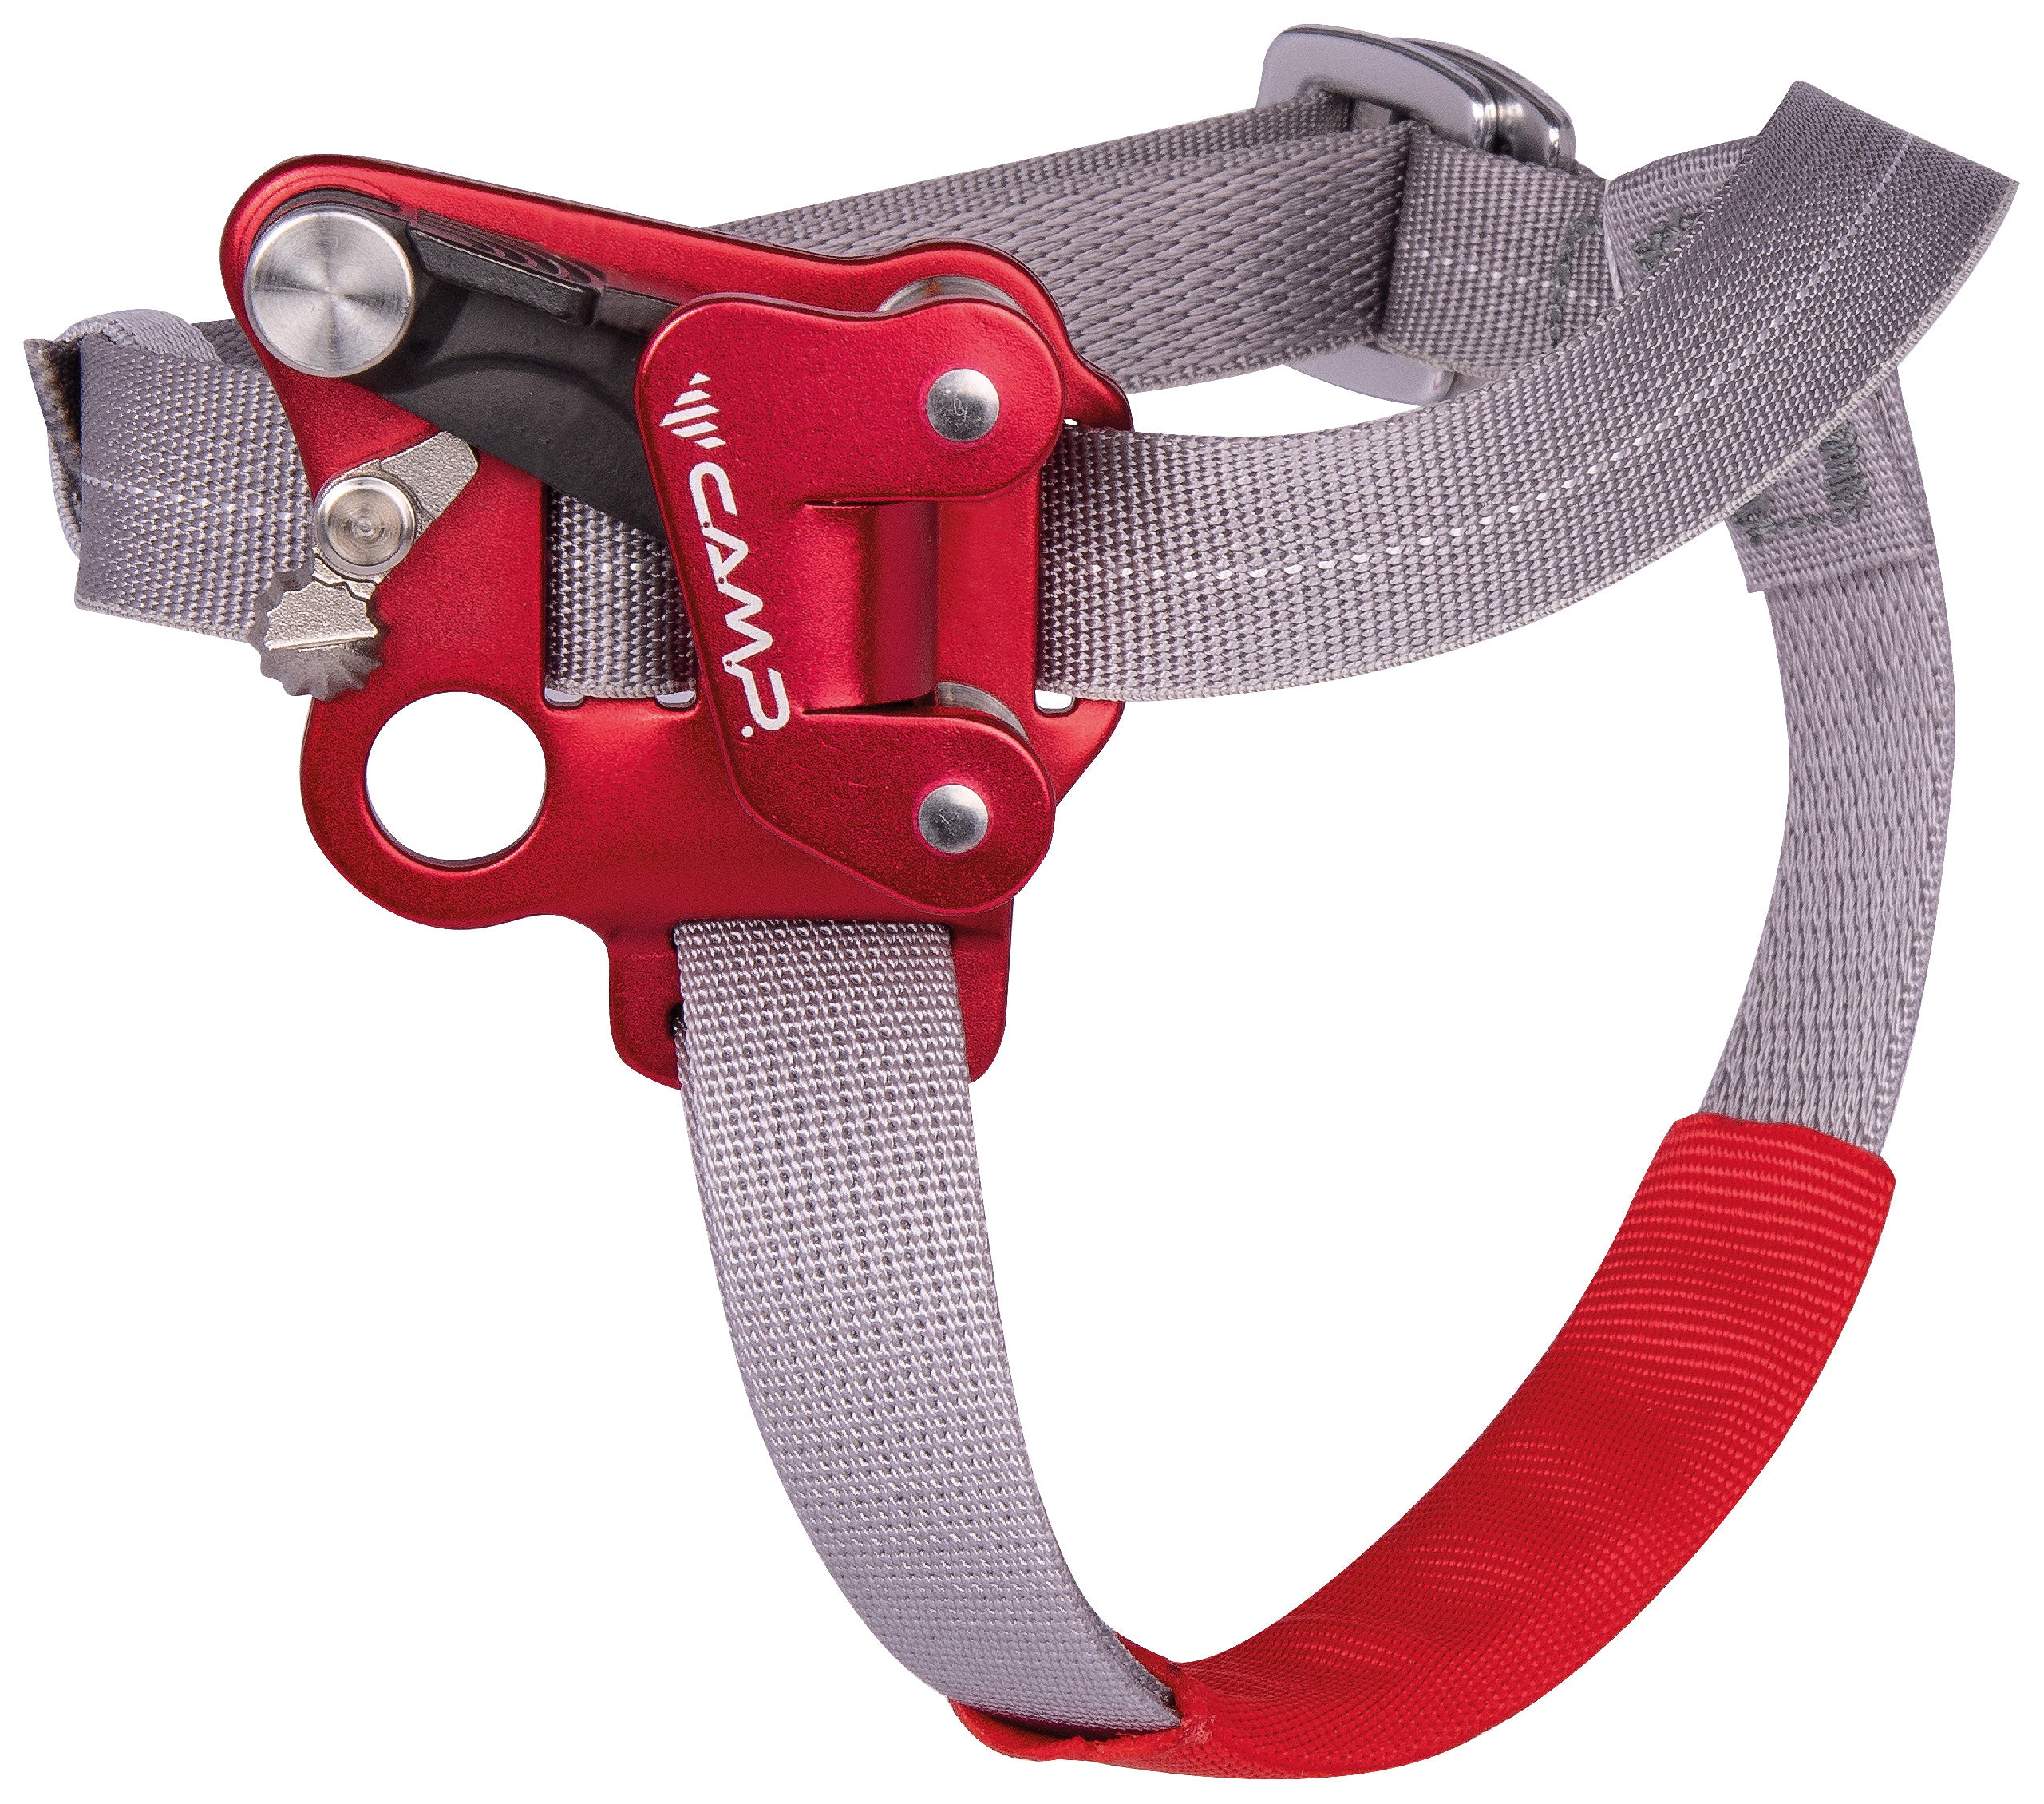 CAMP Safety TURBOFOOT Rope Foot Ascender - SecureHeights